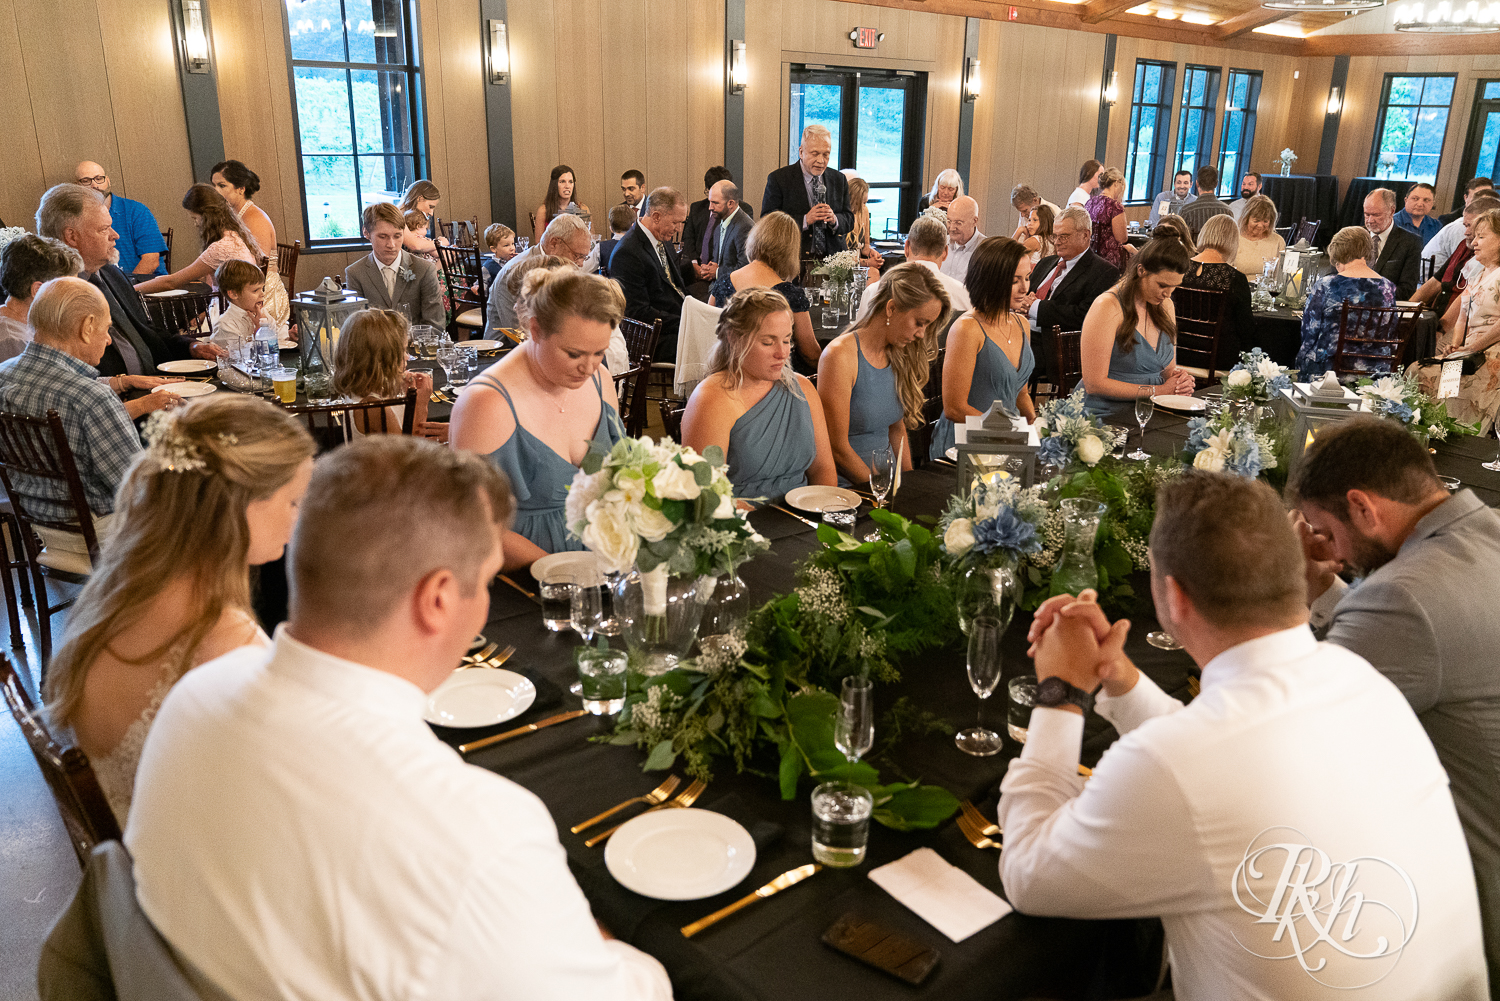 Bride and groom pray at head table during wedding reception at 7 Vines Vineyard in Dellwood, Minnesota.